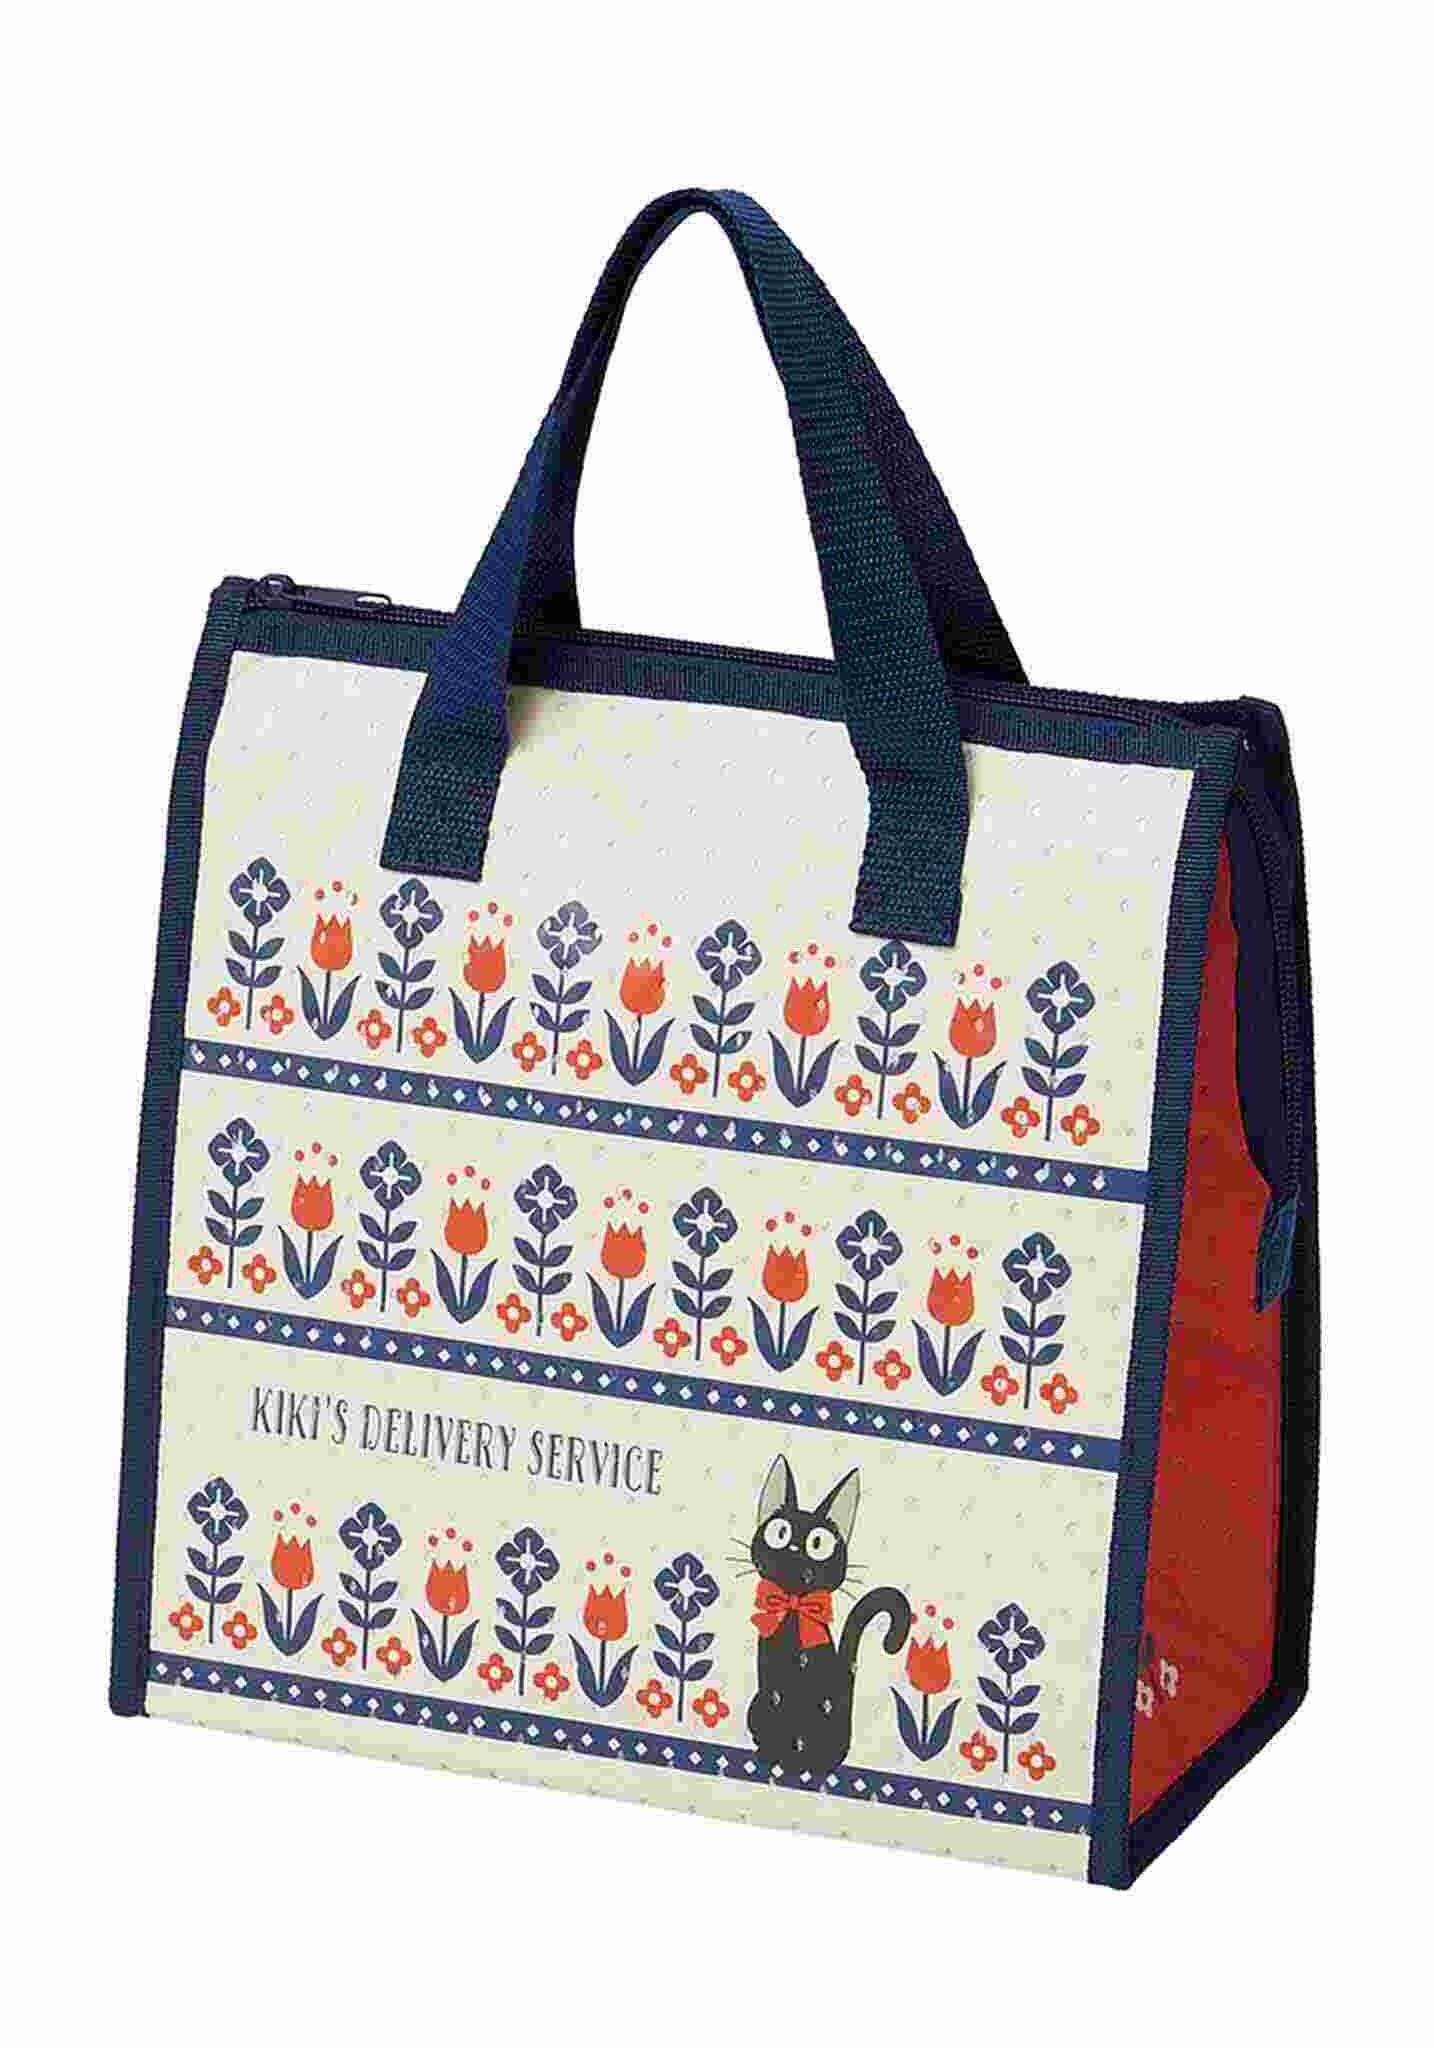 Insulated Lunch Tote - Kiki's Delivery Service (Bakery) SK-GHB-1511 -  Matcha Time Gift Shop